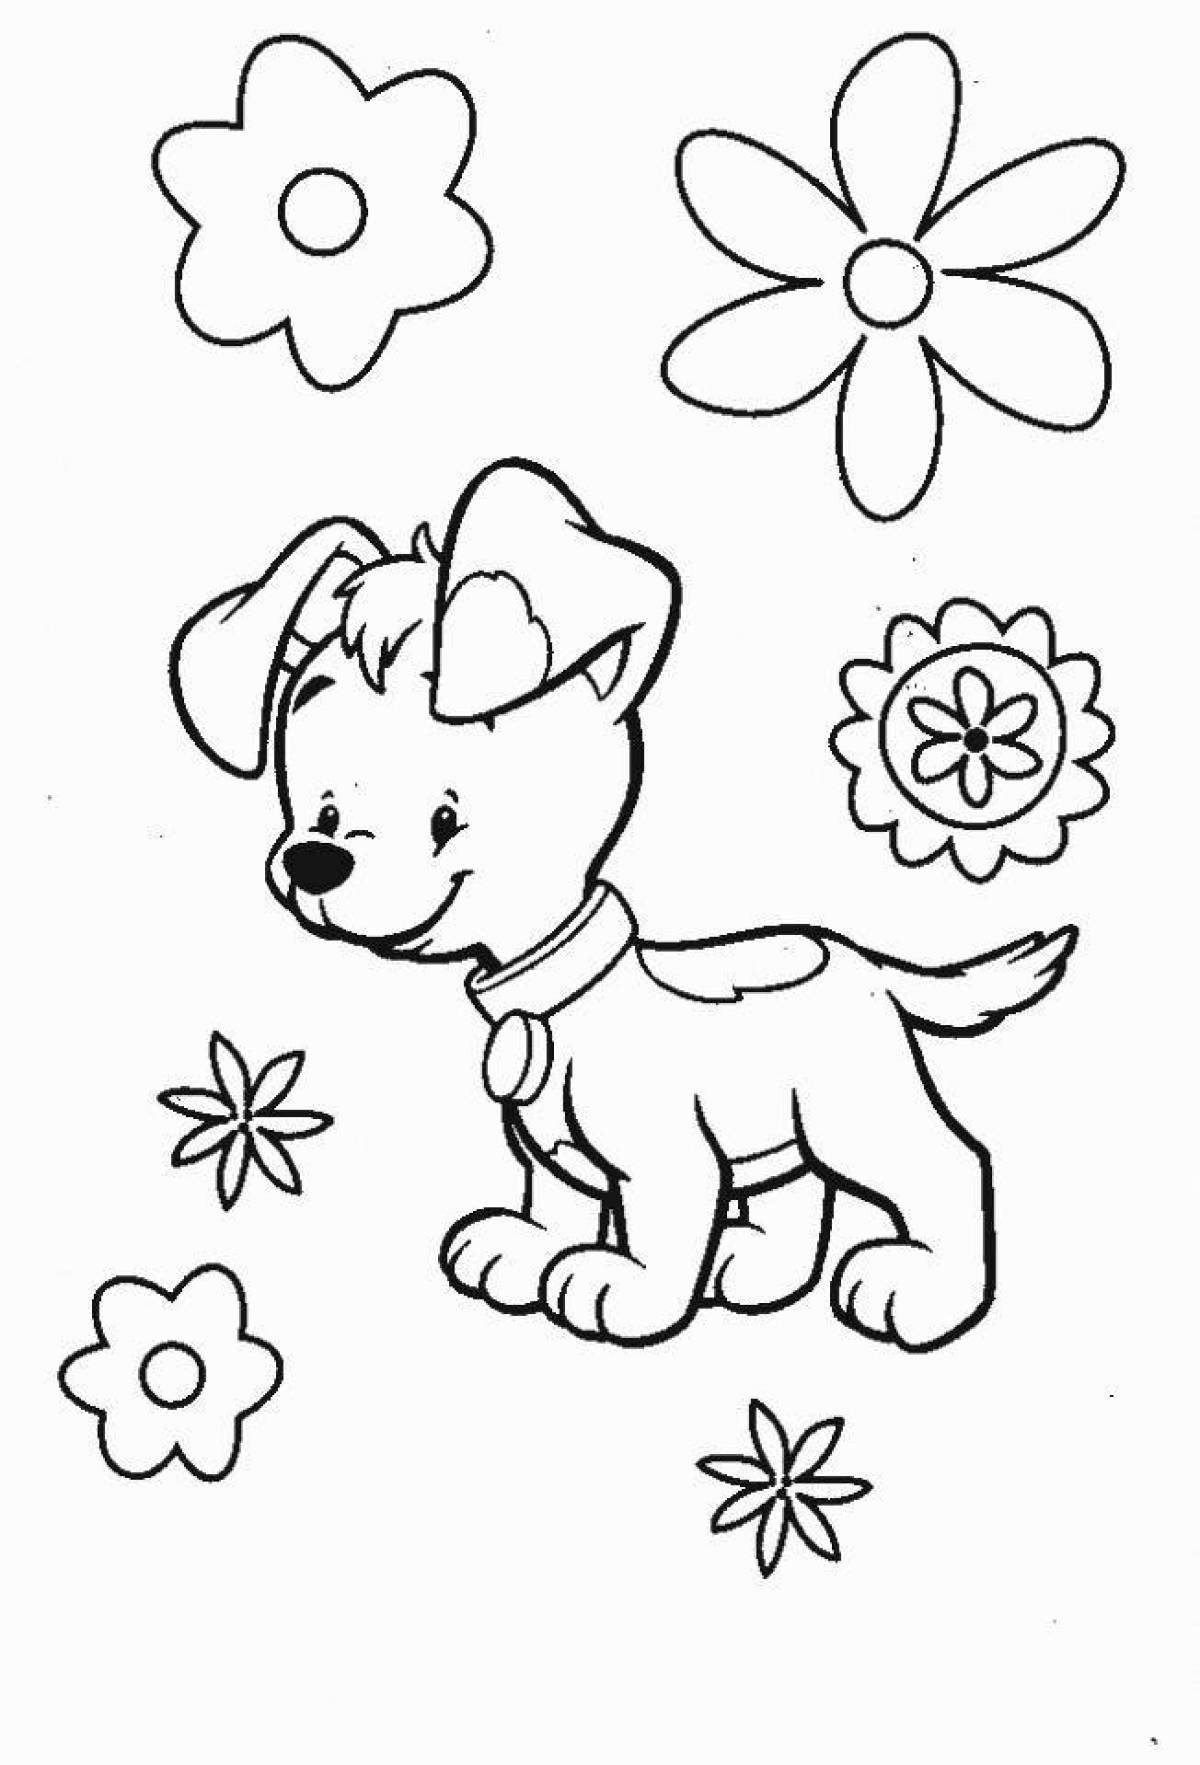 Bright dog-coloring book for children 3-4 years old